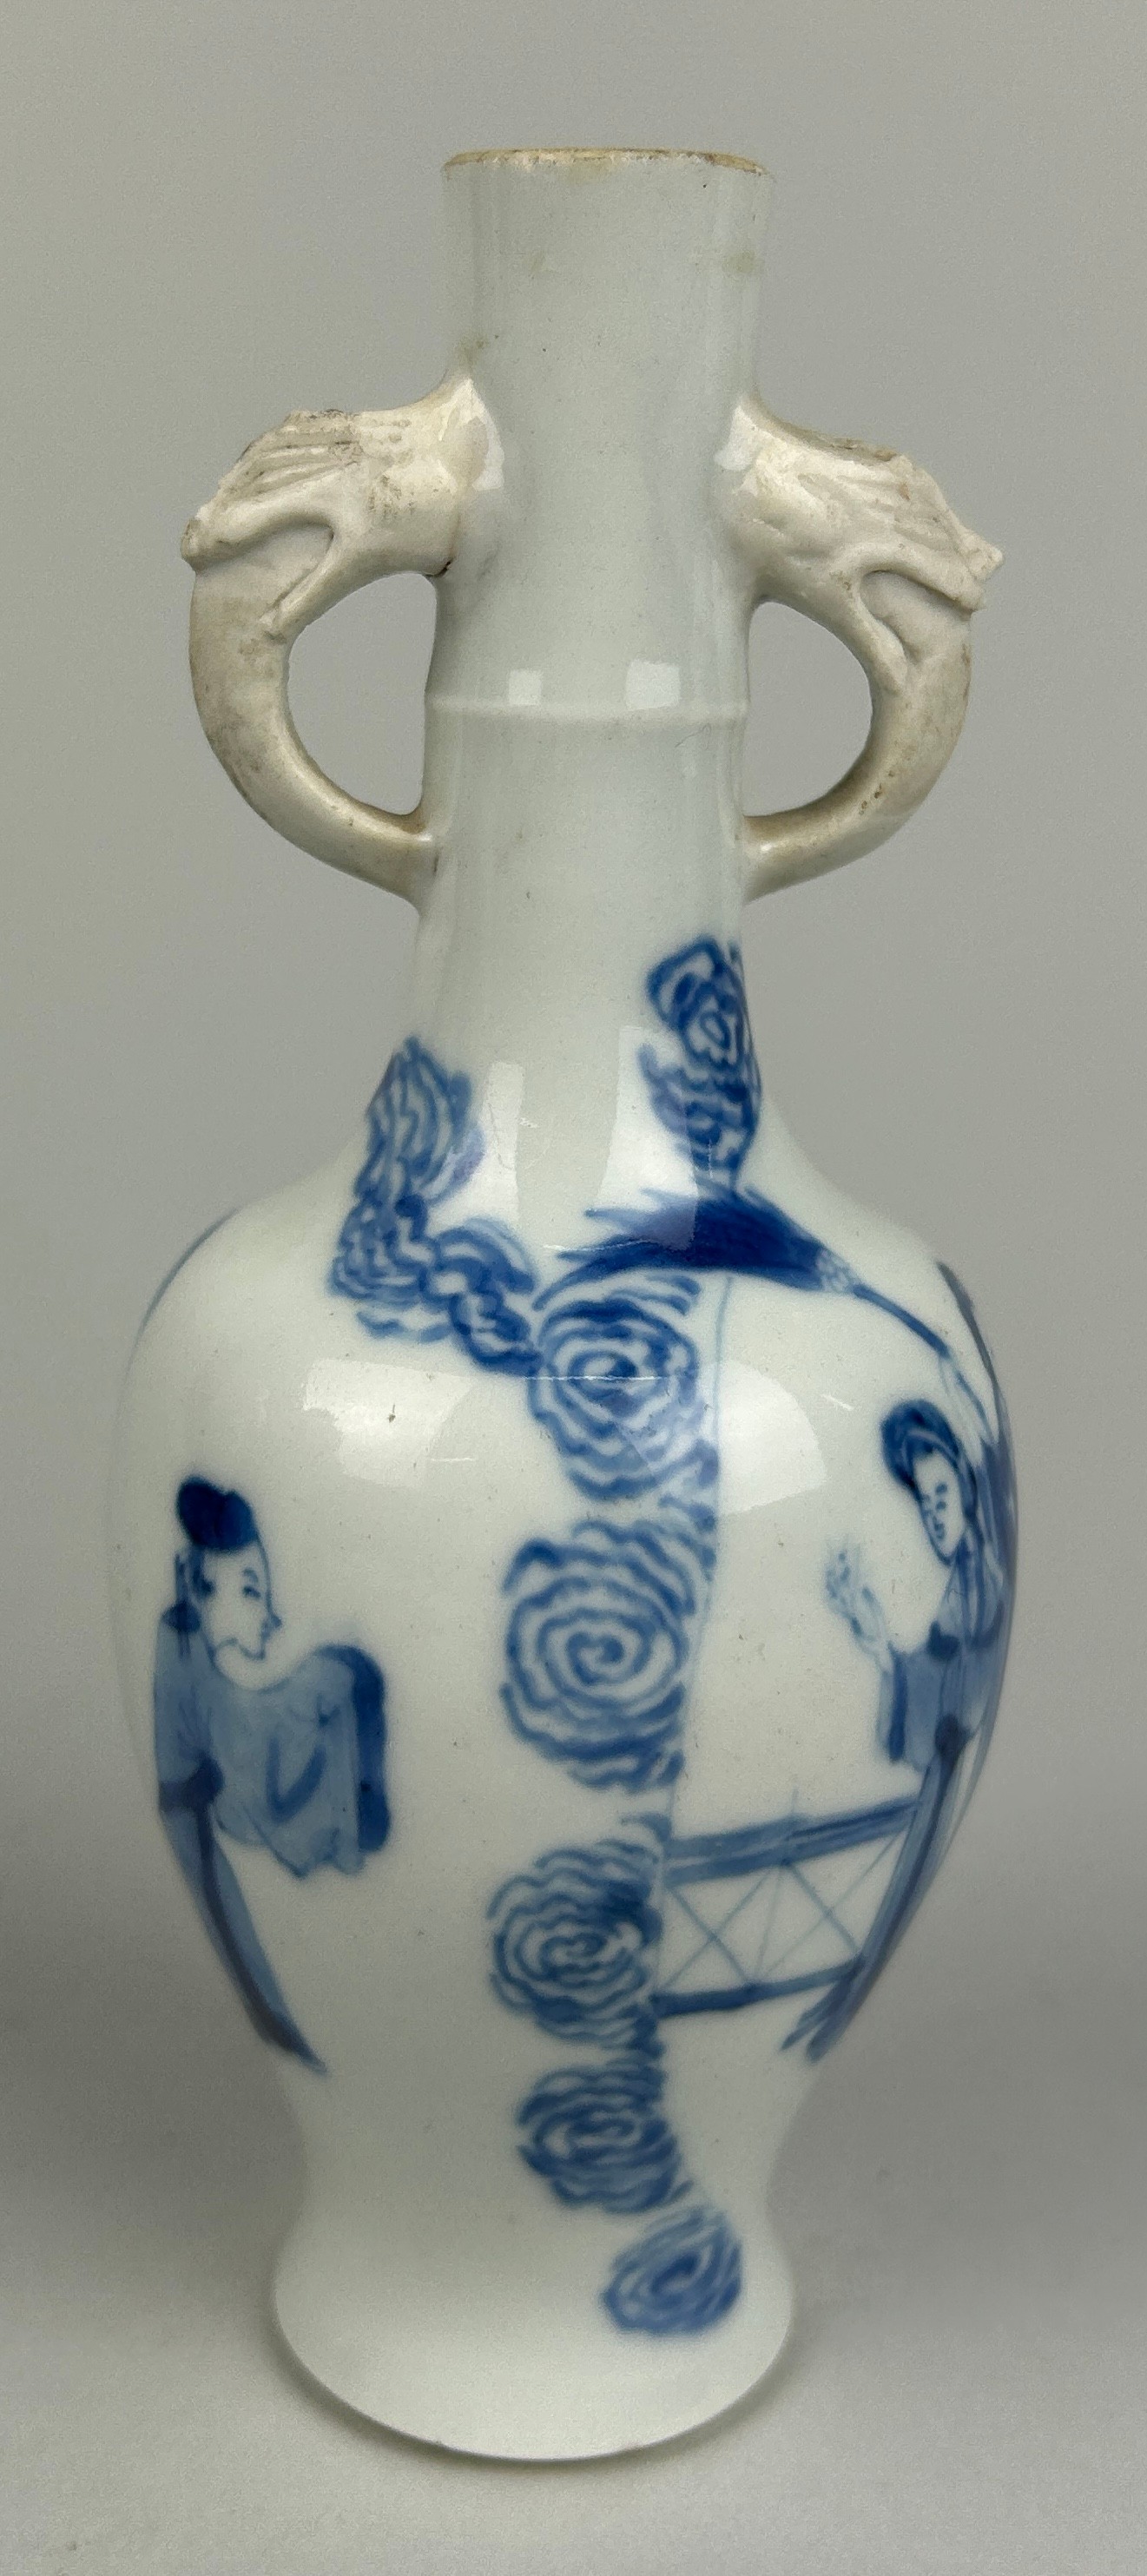 A SMALL KANGXI PERIOD CHINESE BLUE AND WHITE BOTTLE VASE WITH BISCUIT ELEPHANT HEAD HANDLES, 16cm